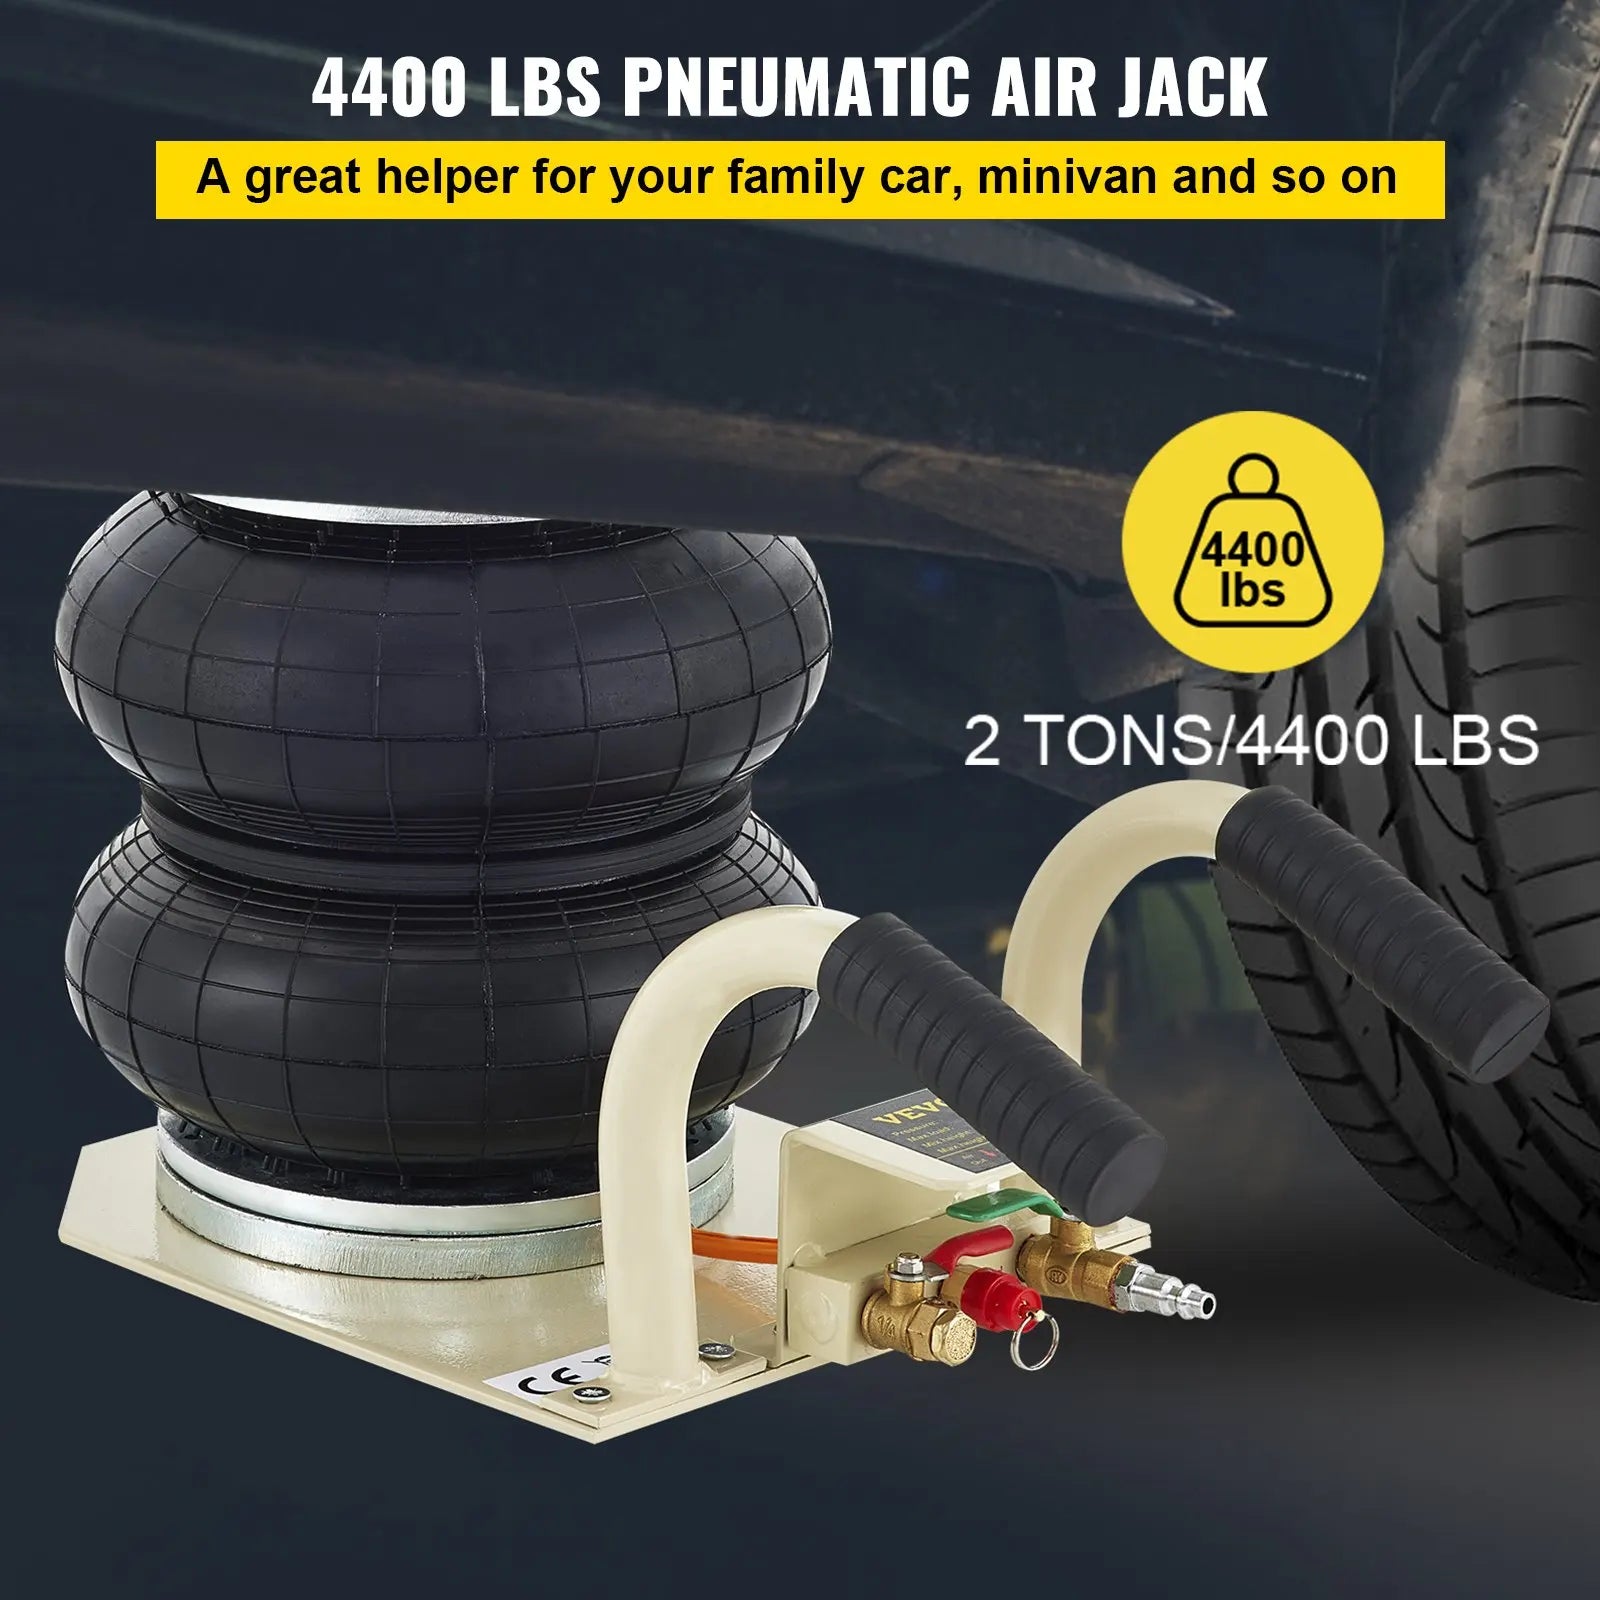 Pneumatic Jack 2 Ton/4400 LBS Air Bag Jack Triple Bag Air Jack for Vehicle Extremely Fast Lifting Action